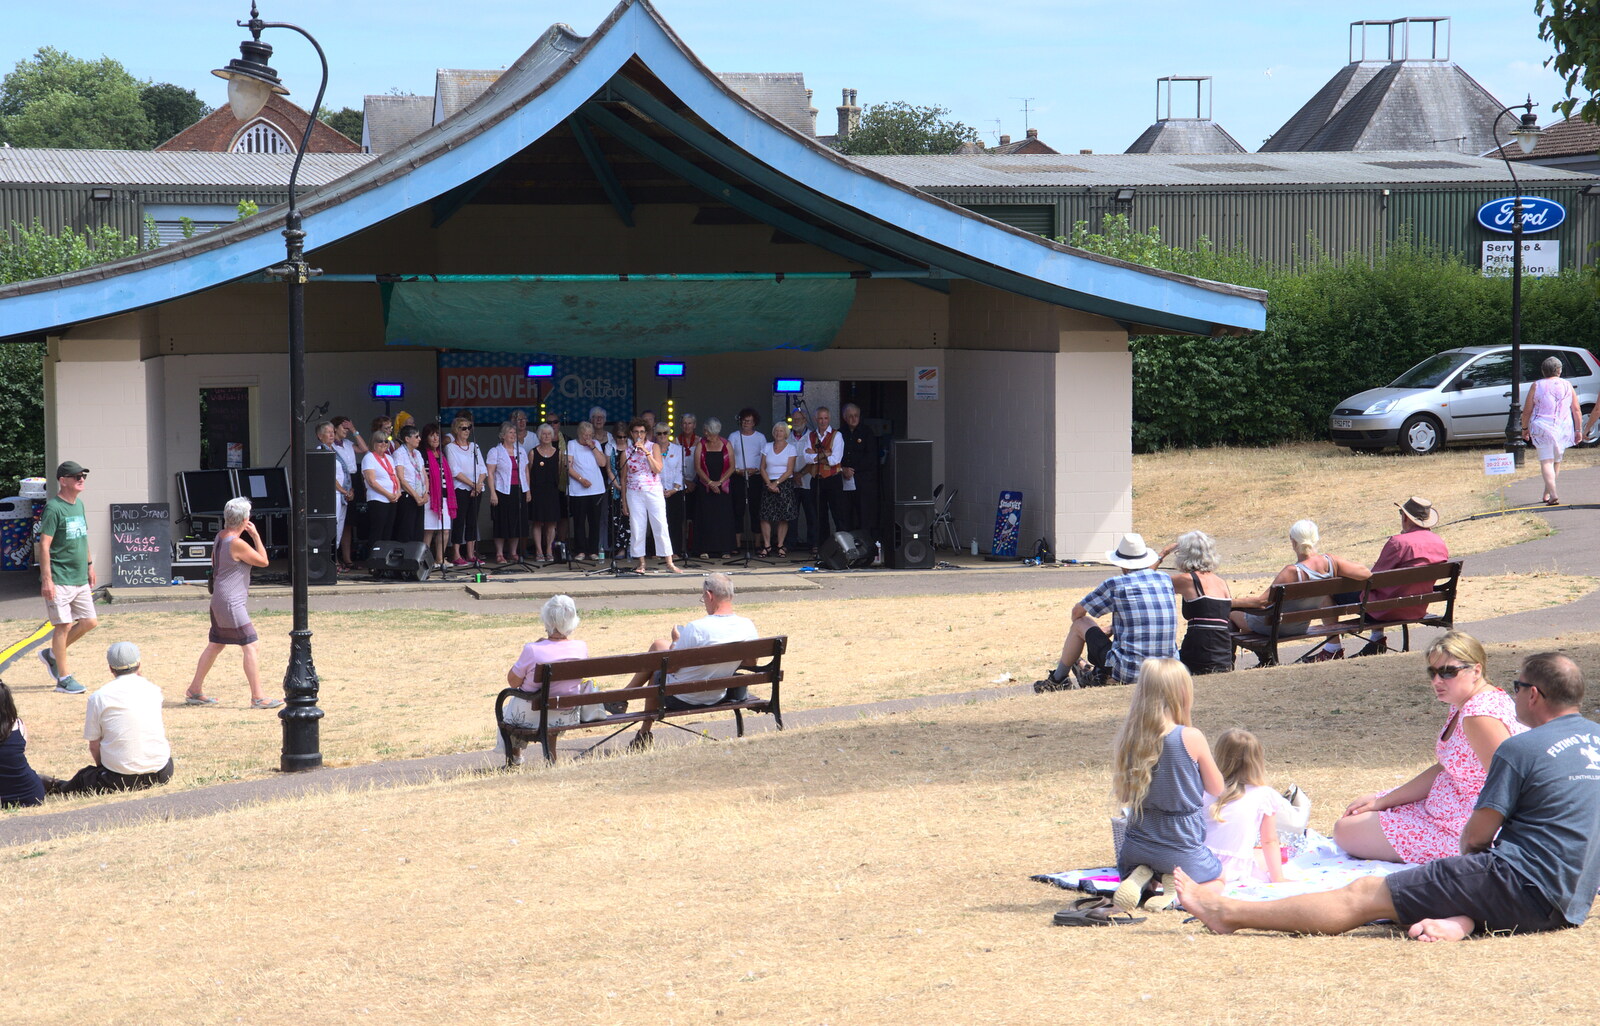 There's another choir doing a session from Diss Fest, The Park, Diss, Norfolk - 22nd July 2018